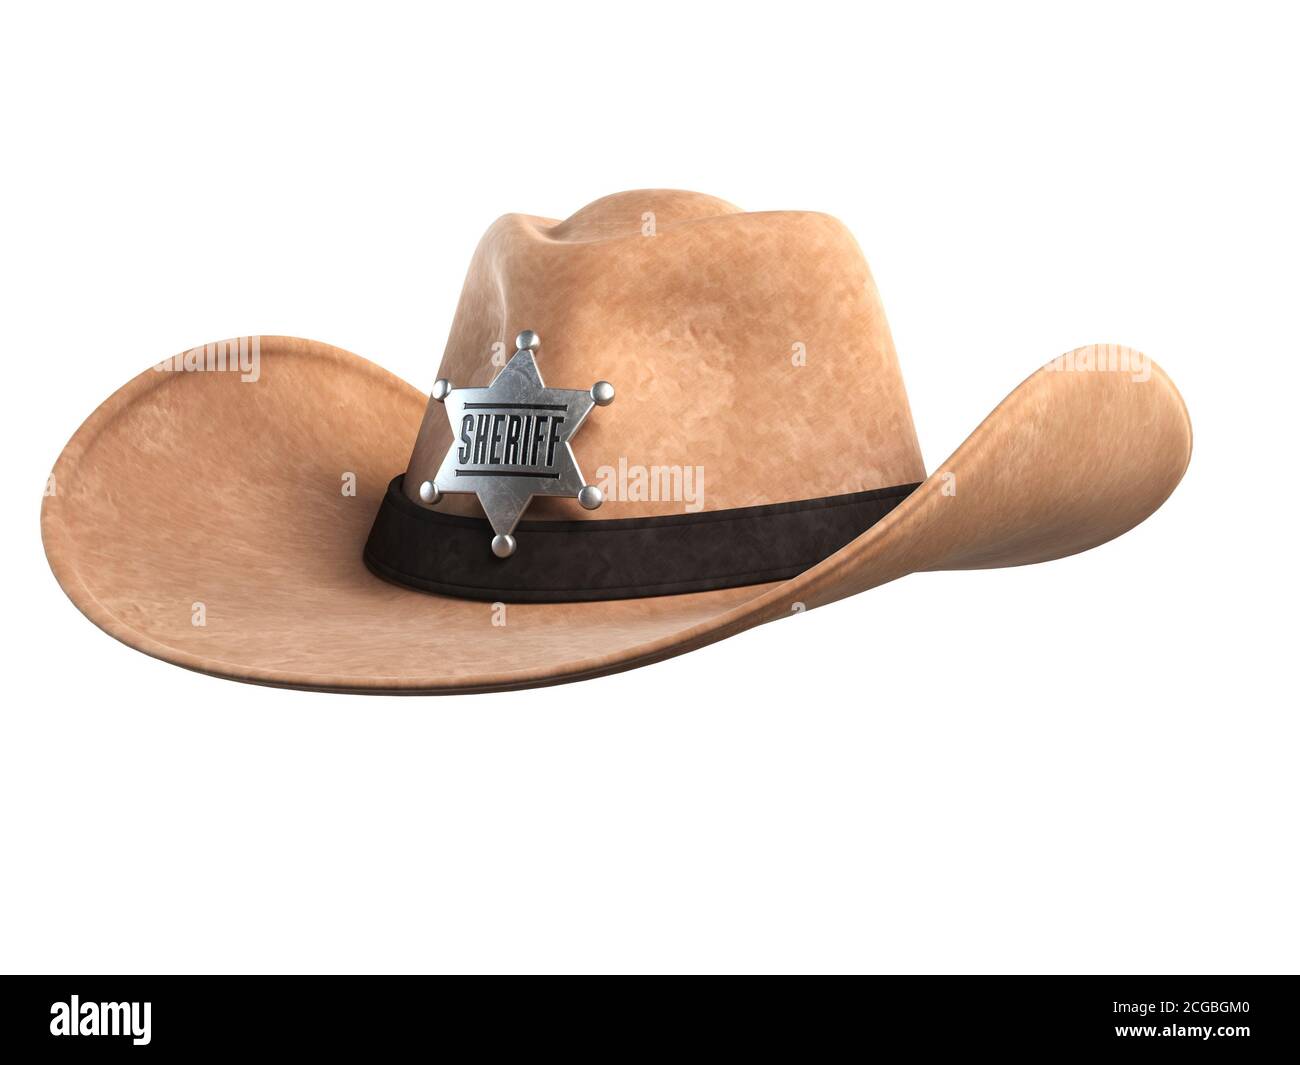 Sheriff hat isolated on white background 3d rendering Stock Photo